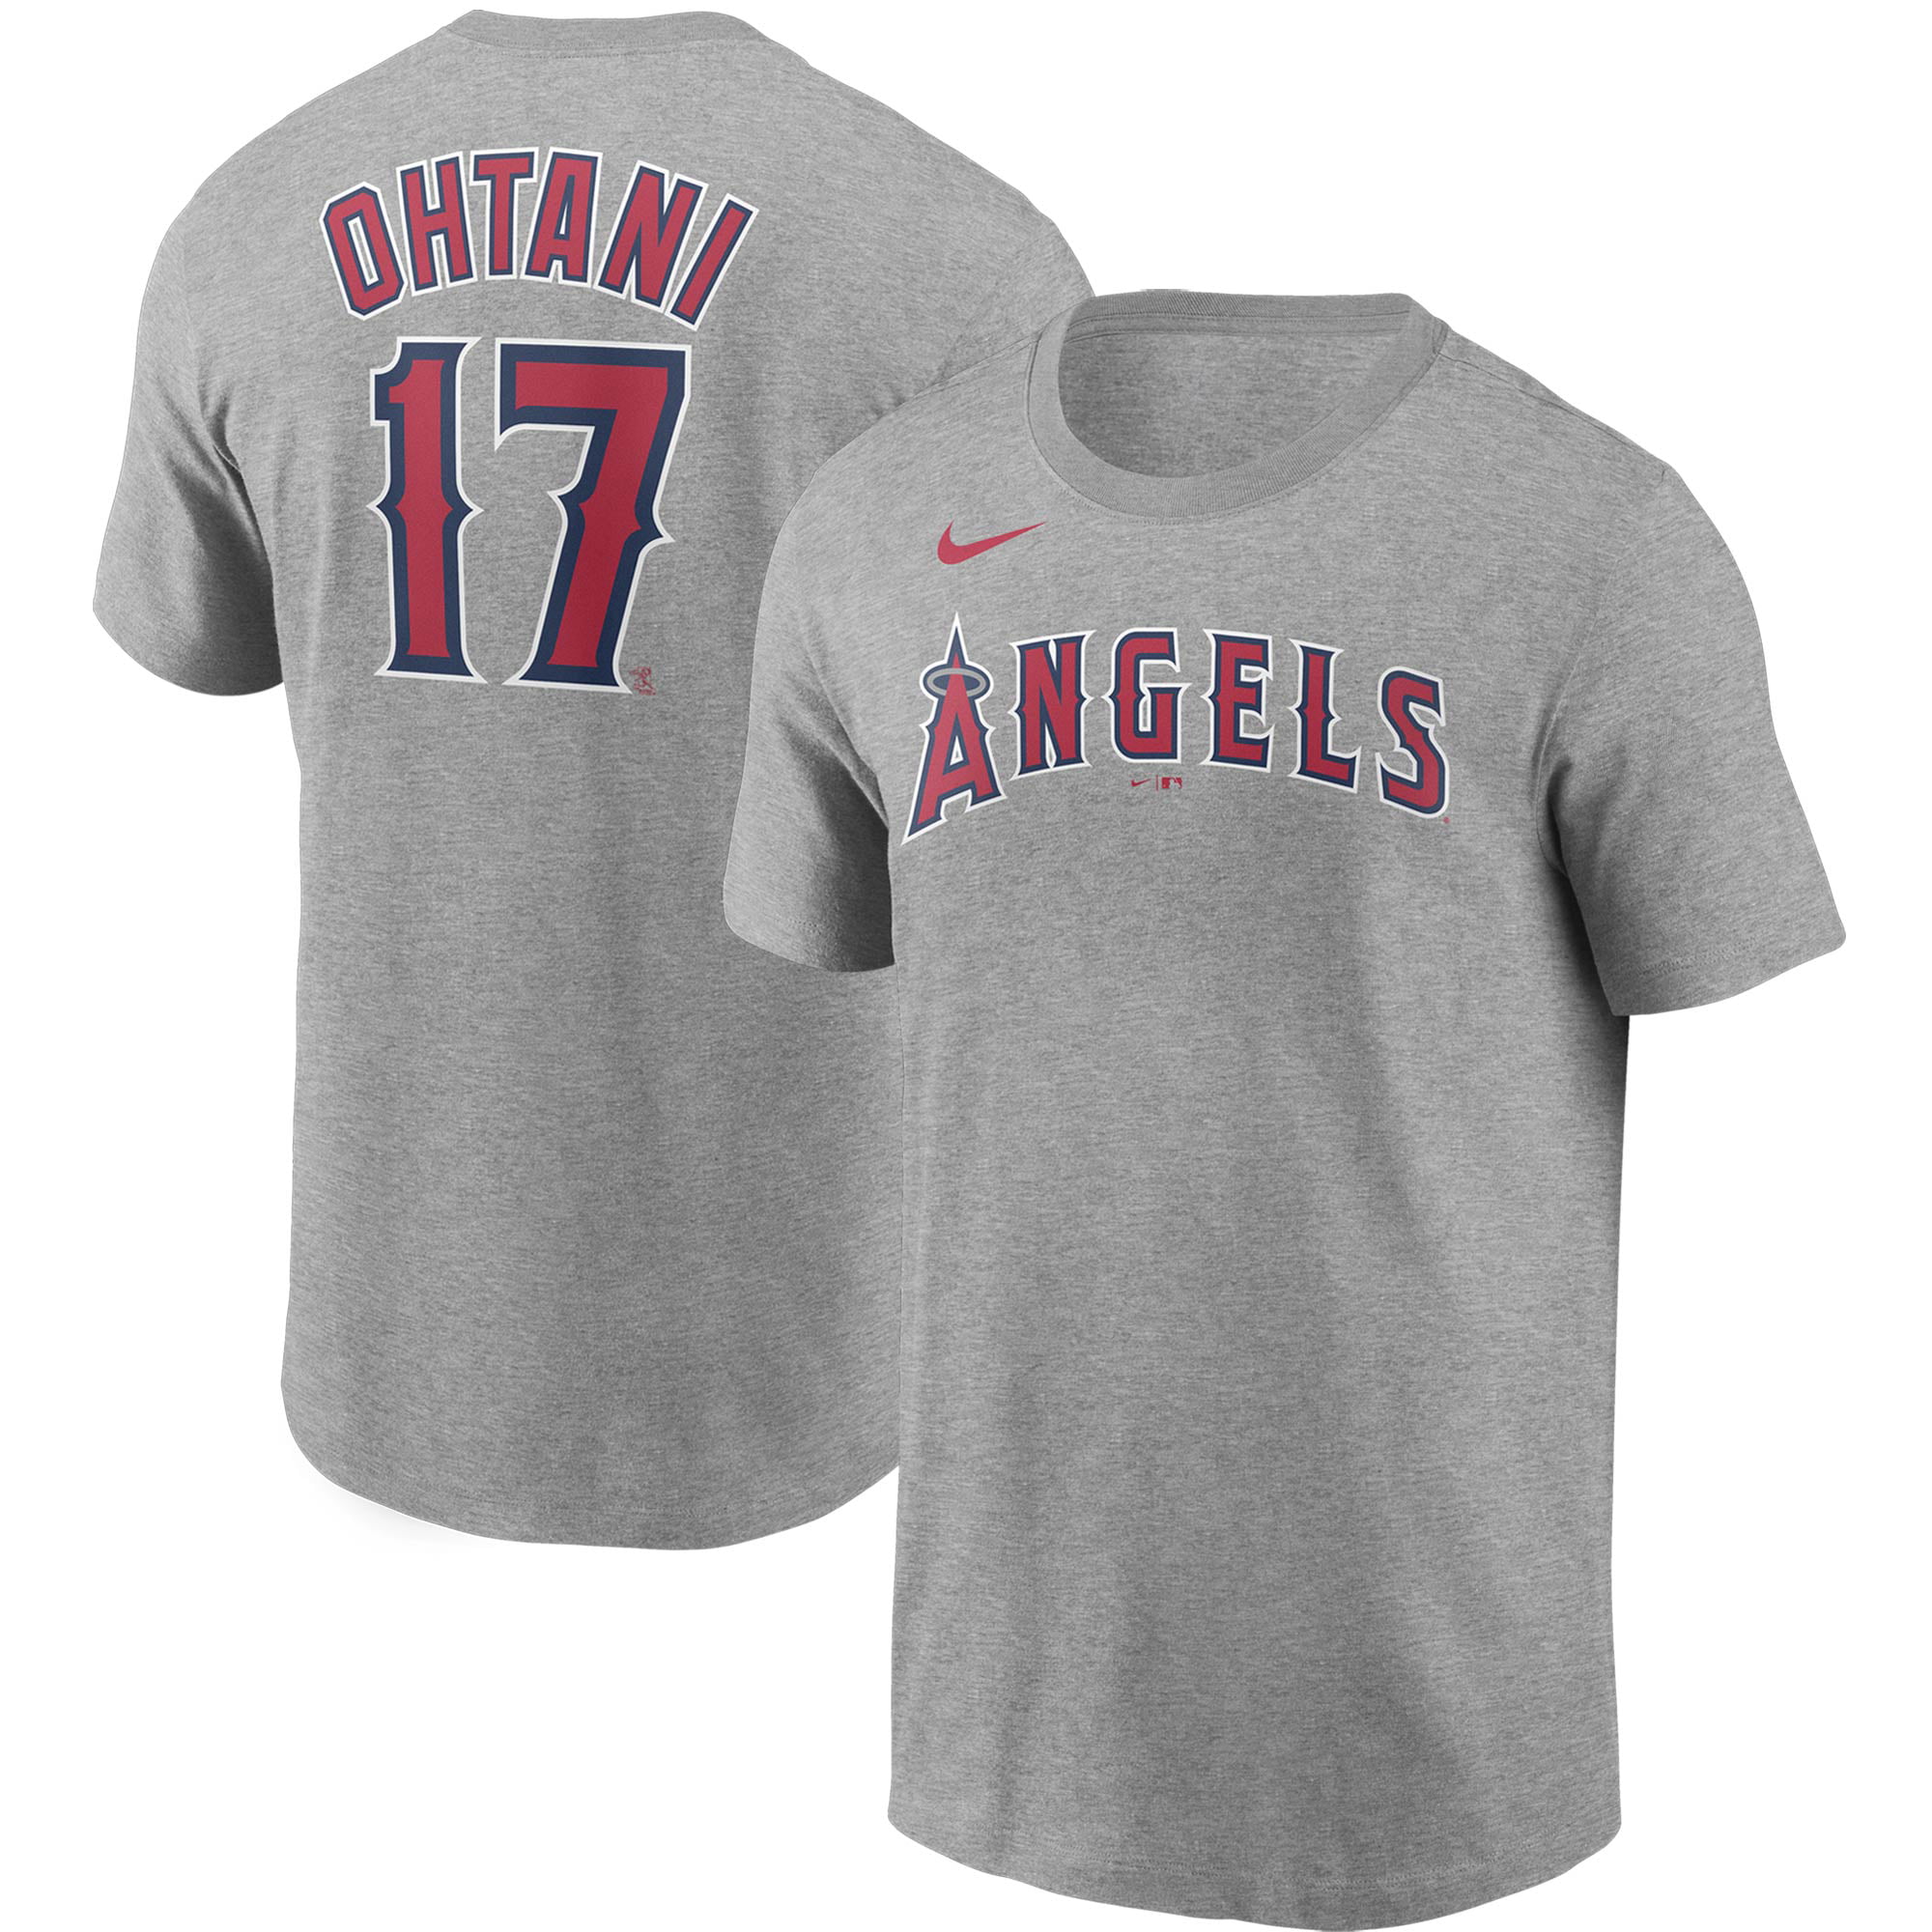 ohtani jersey number